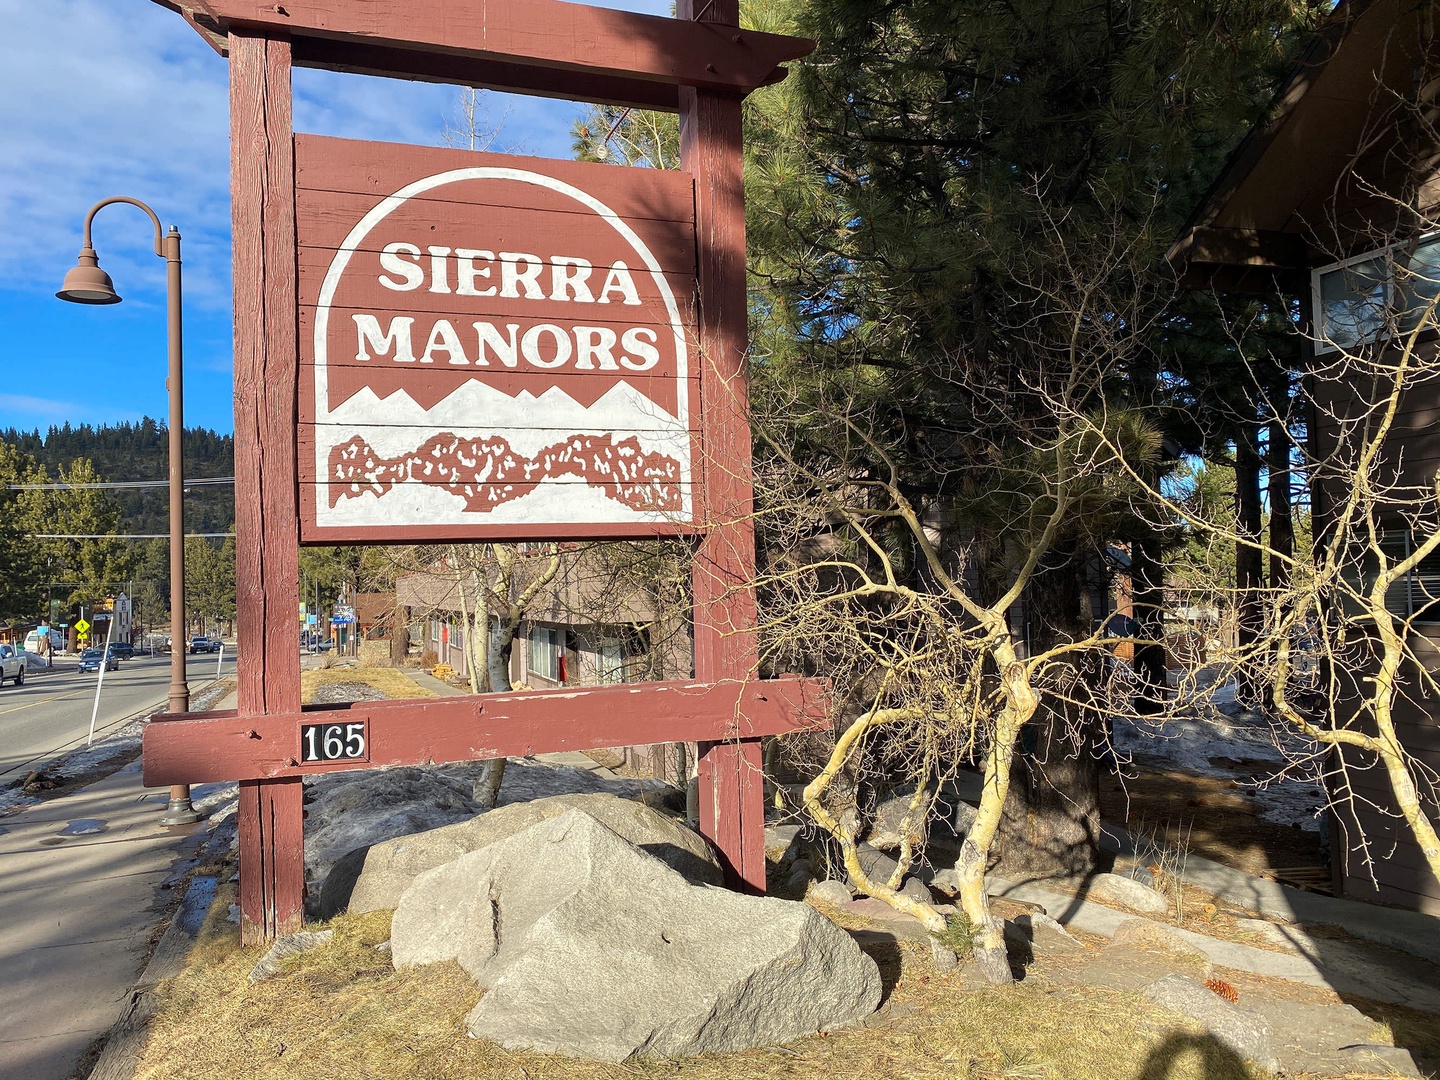 Stay at the Sierra Manors